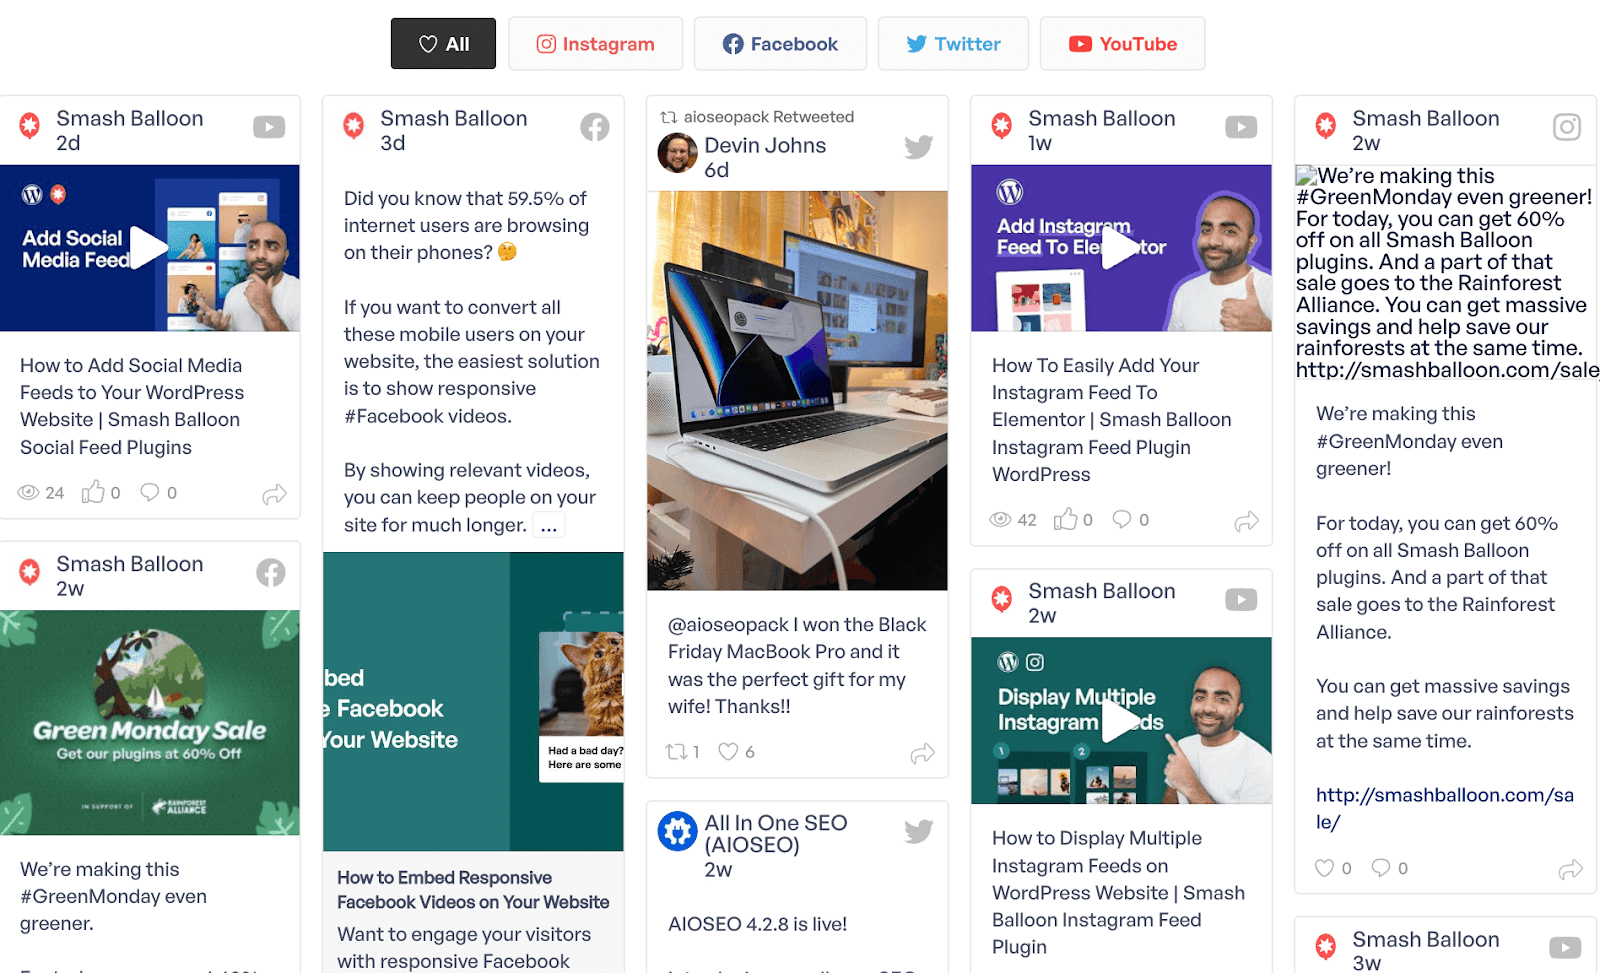 Social wall: All the social media posts are showing in the same place